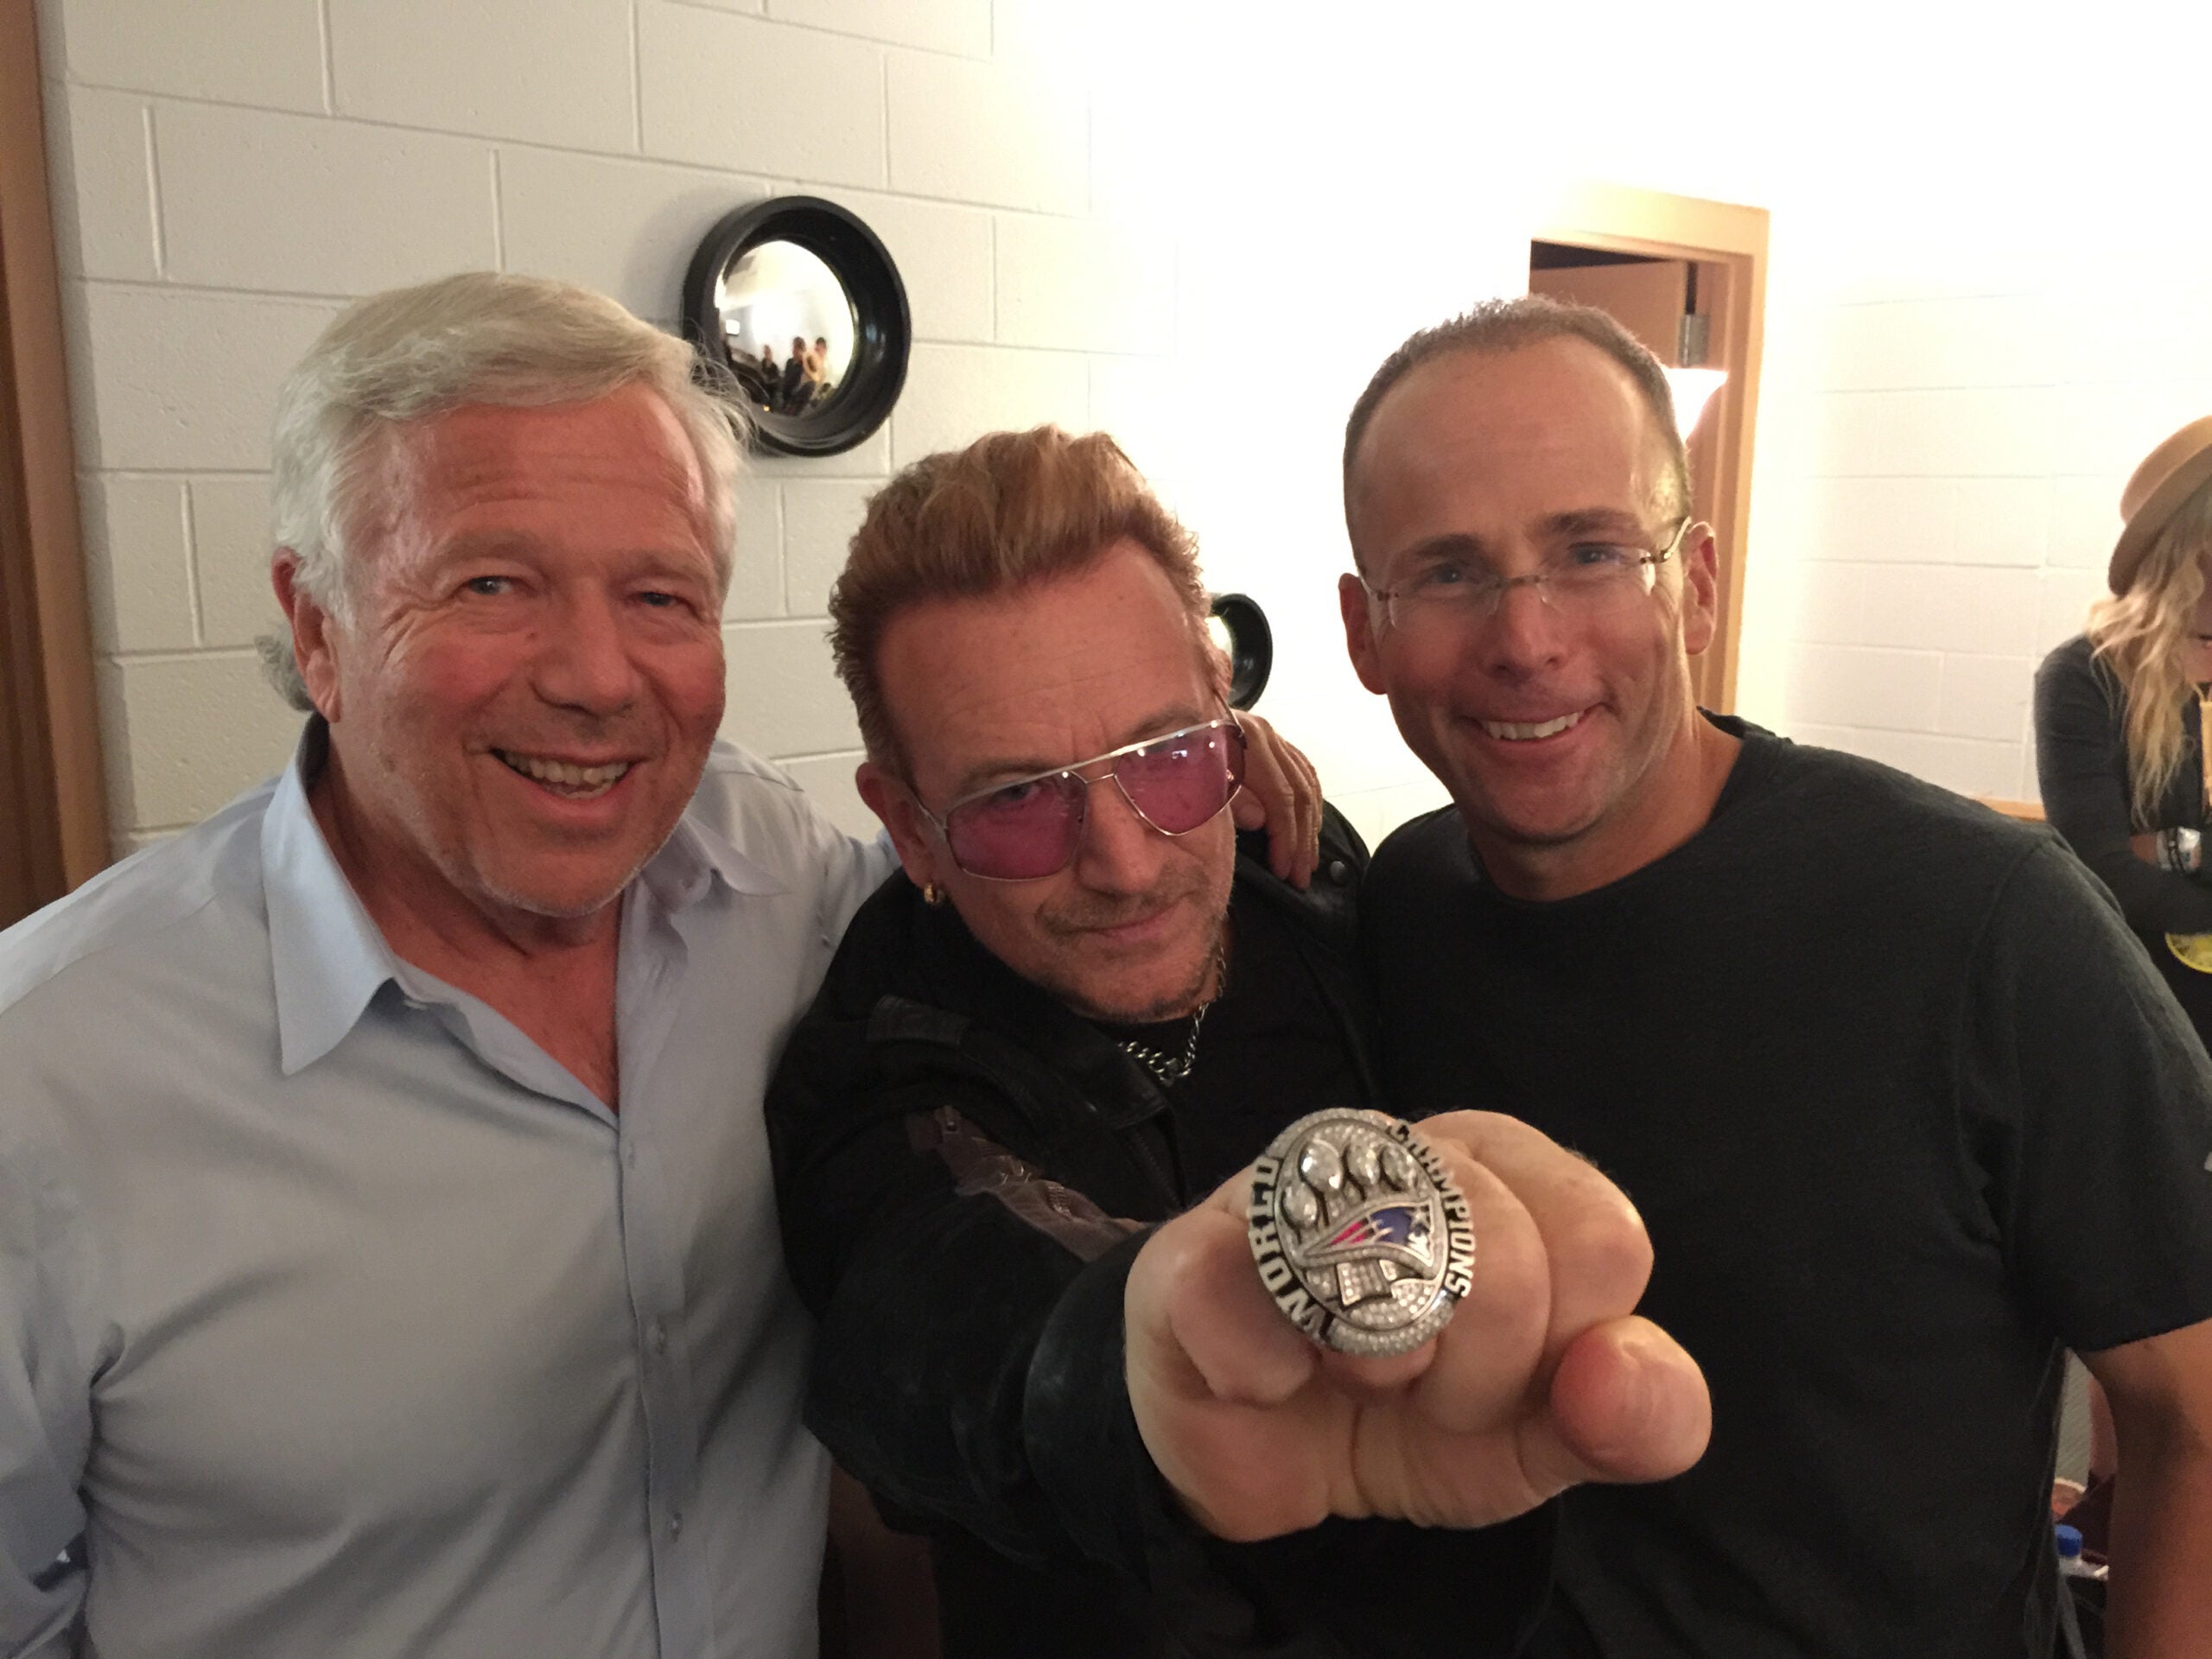 That One Time I Almost Lost a Super Bowl Ring | GQ